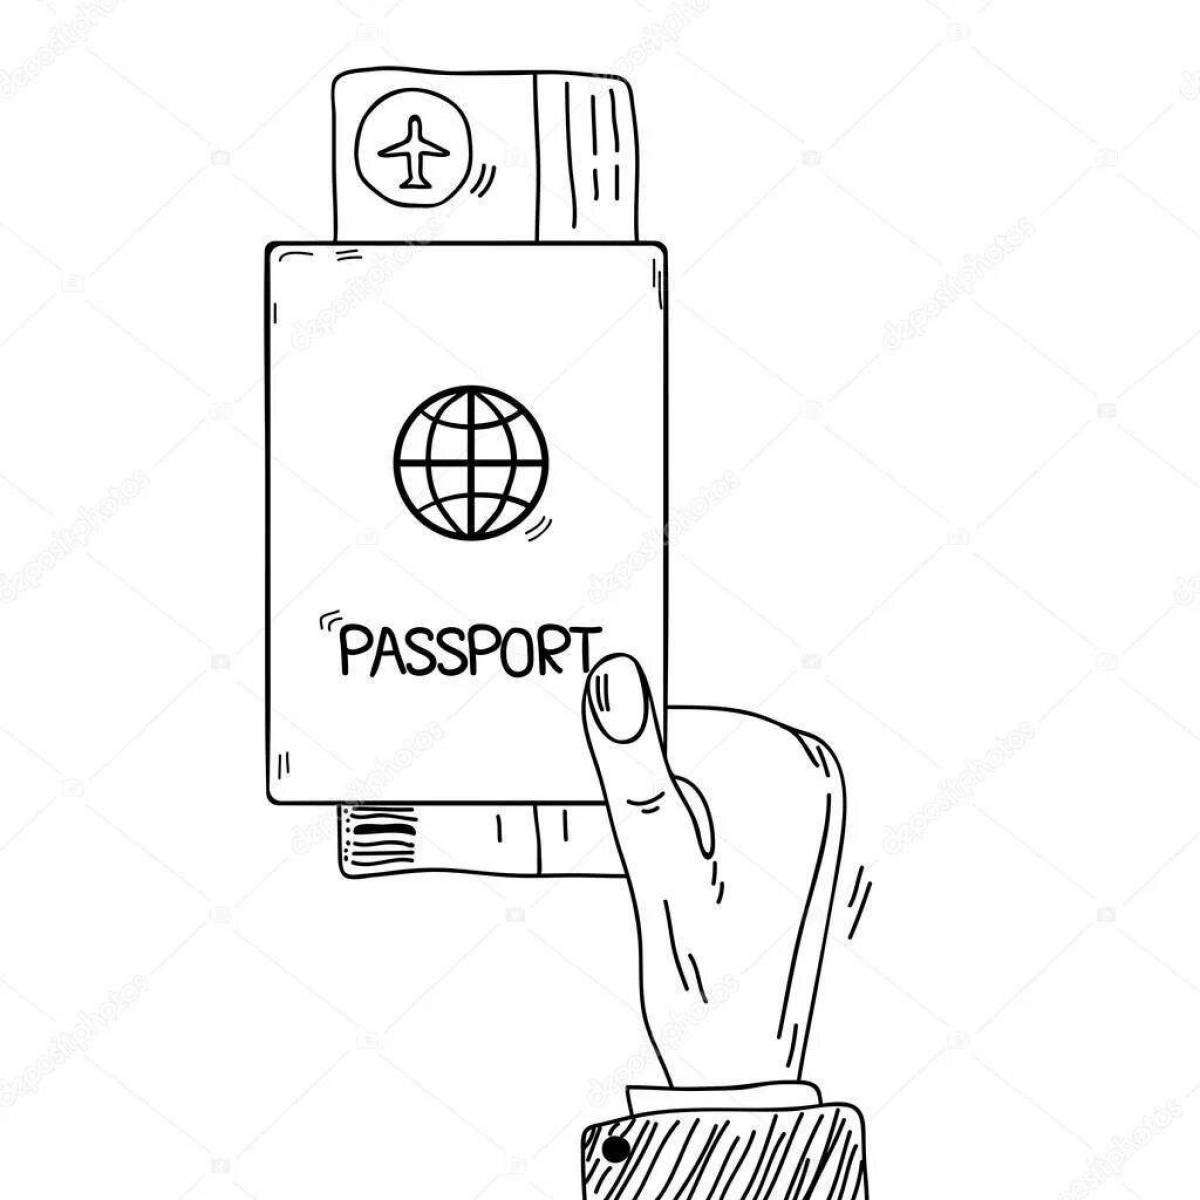 Colourful junior passport coloring page